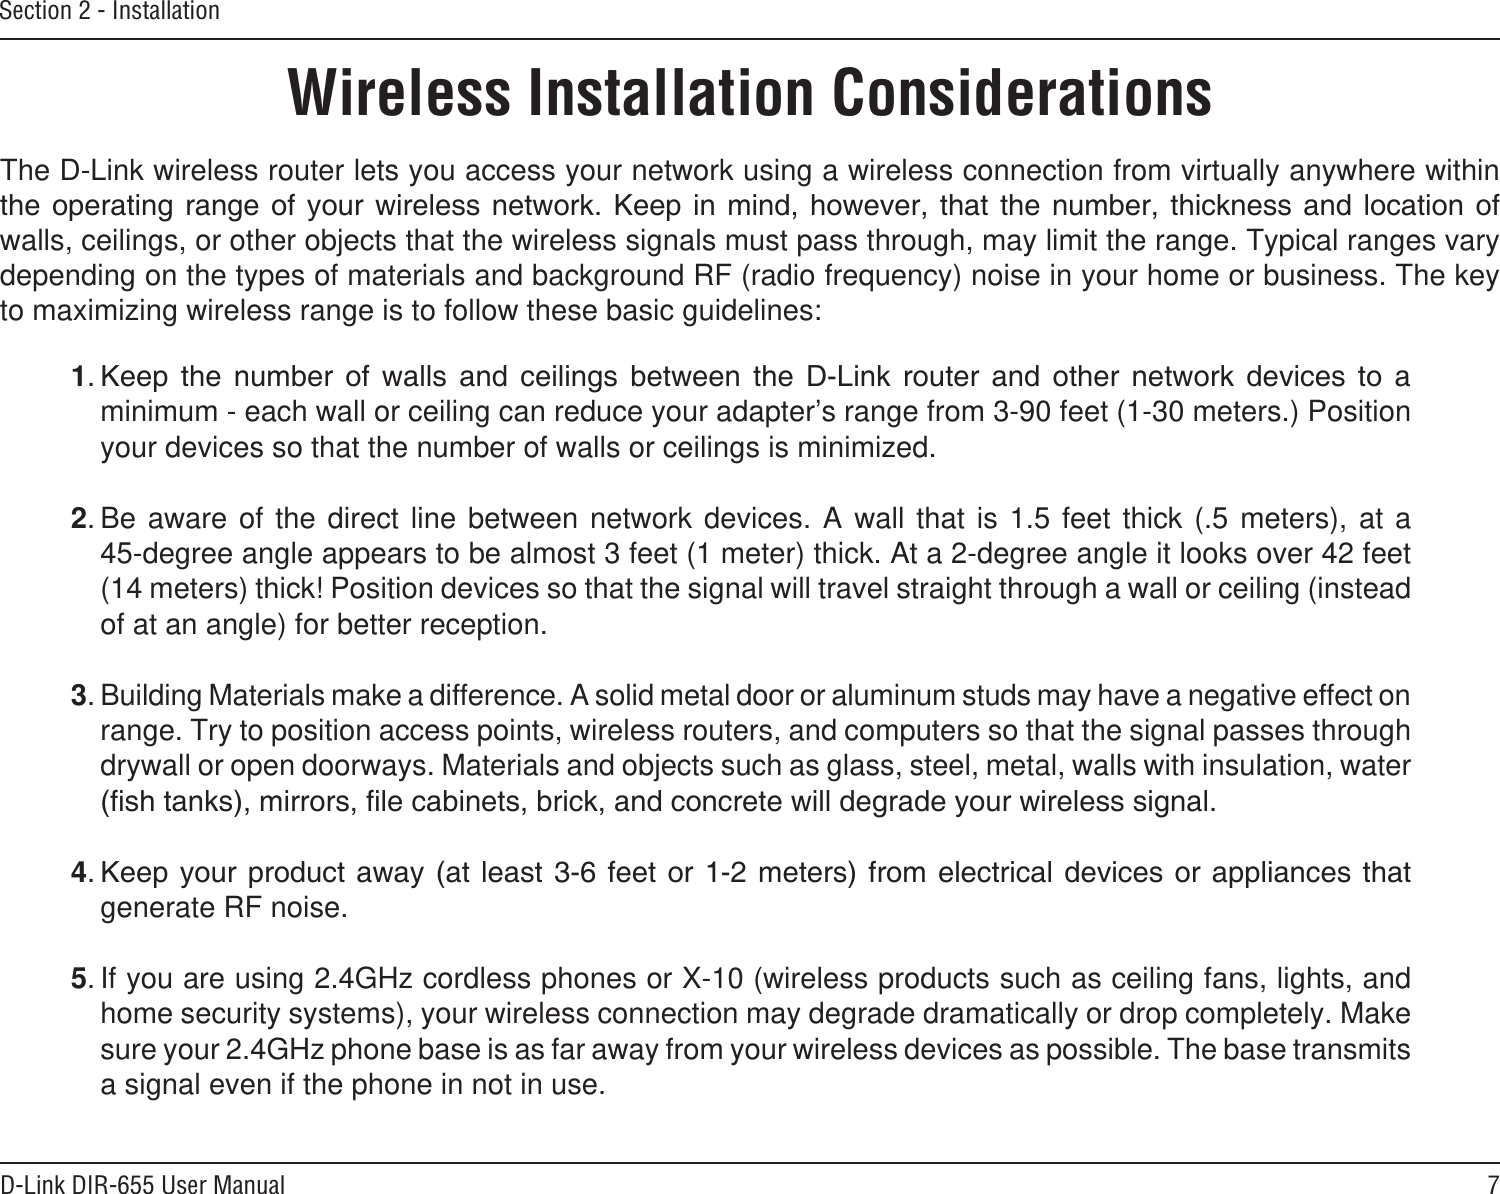 7D-Link DIR-655 User ManualSection 2 - InstallationWireless Installation ConsiderationsThe D-Link wireless router lets you access your network using a wireless connection from virtually anywhere within        walls, ceilings, or other objects that the wireless signals must pass through, may limit the range. Typical ranges vary depending on the types of materials and background RF (radio frequency) noise in your home or business. The key to maximizing wireless range is to follow these basic guidelines:1                minimum - each wall or ceiling can reduce your adapter’s range from 3-90 feet (1-30 meters.) Position your devices so that the number of walls or ceilings is minimized.2. Be aware  of  the  direct  line  between  network  devices.  A  wall  that  is  1.5  feet  thick  (.5  meters),  at  a   45-degree angle appears to be almost 3 feet (1 meter) thick. At a 2-degree angle it looks over 42 feet (14 meters) thick! Position devices so that the signal will travel straight through a wall or ceiling (instead of at an angle) for better reception.3. Building Materials make a difference. A solid metal door or aluminum studs may have a negative effect on range. Try to position access points, wireless routers, and computers so that the signal passes through drywall or open doorways. Materials and objects such as glass, steel, metal, walls with insulation, water 4    generate RF noise.5. If you are using 2.4GHz cordless phones or X-10 (wireless products such as ceiling fans, lights, and home security systems), your wireless connection may degrade dramatically or drop completely. Make sure your 2.4GHz phone base is as far away from your wireless devices as possible. The base transmits a signal even if the phone in not in use.